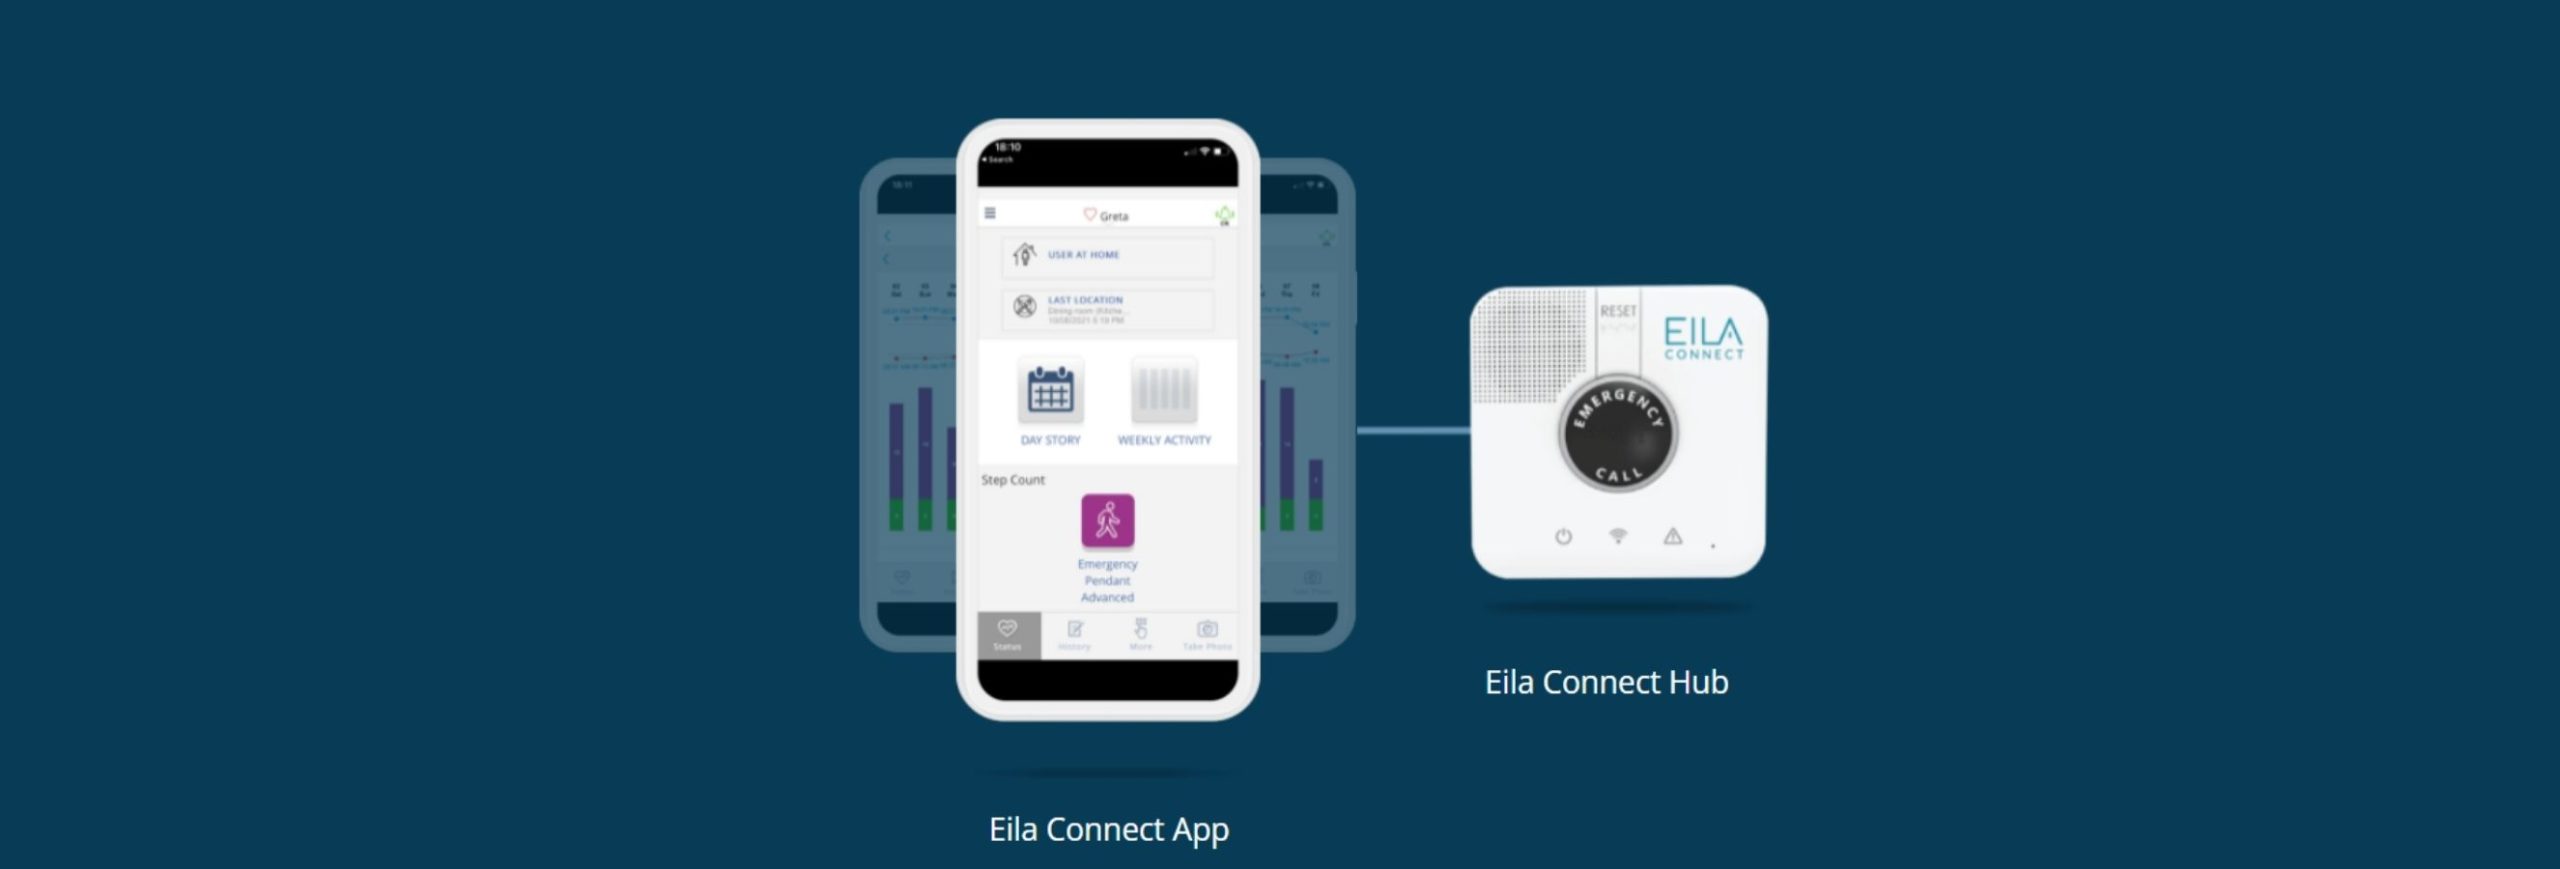 What Is Eila Connect?